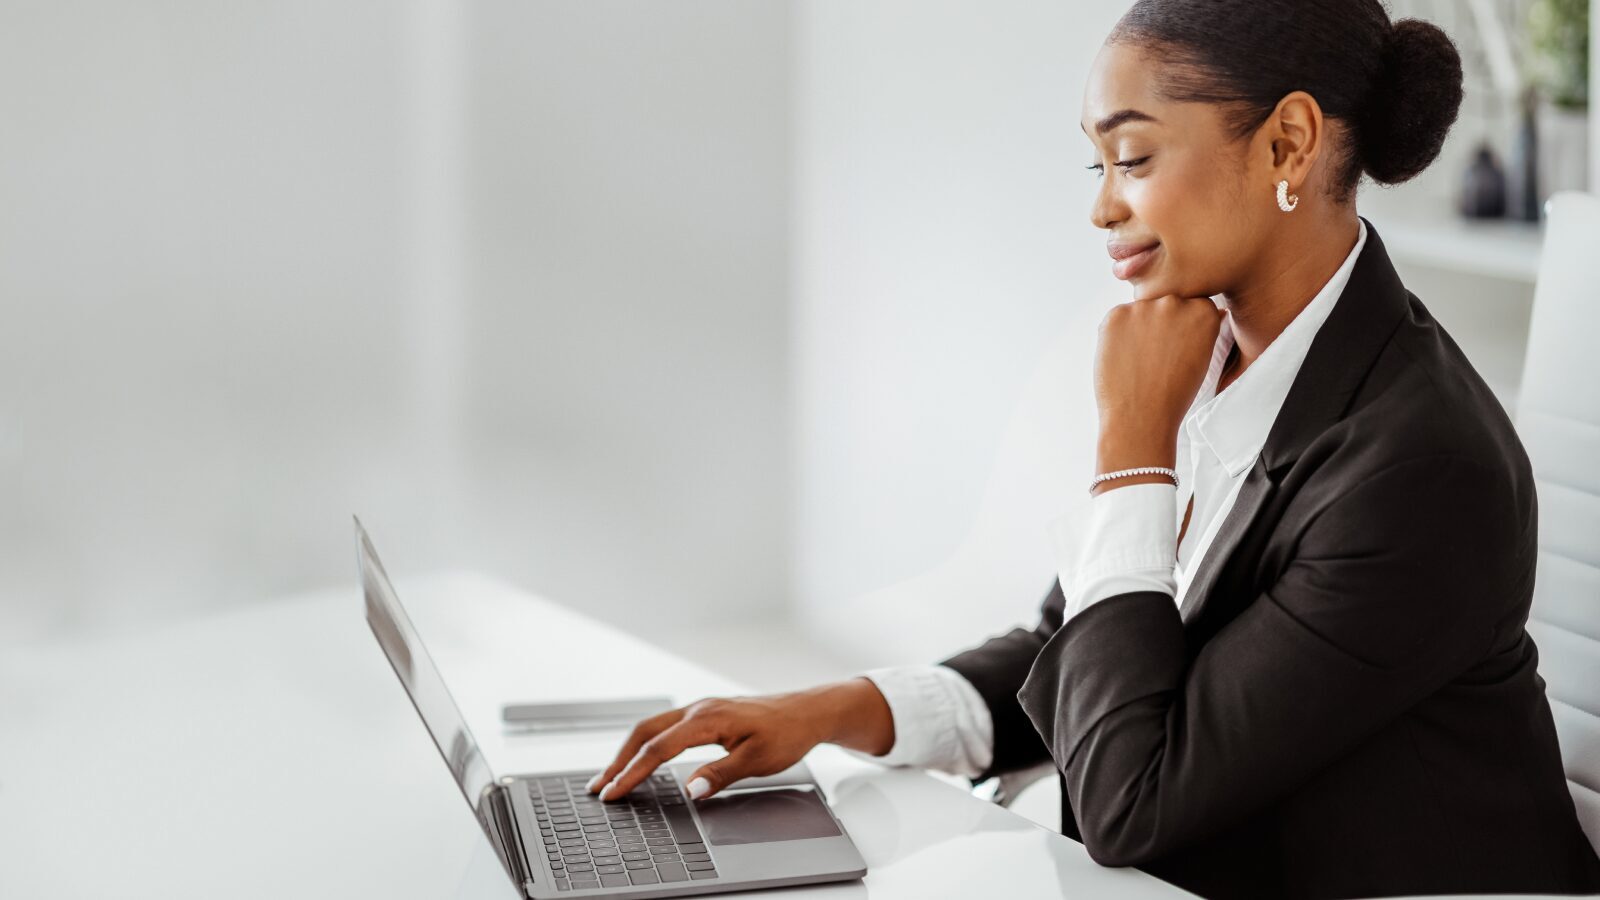 A woman in a business suit looks thoughtfully at her laptop screen.